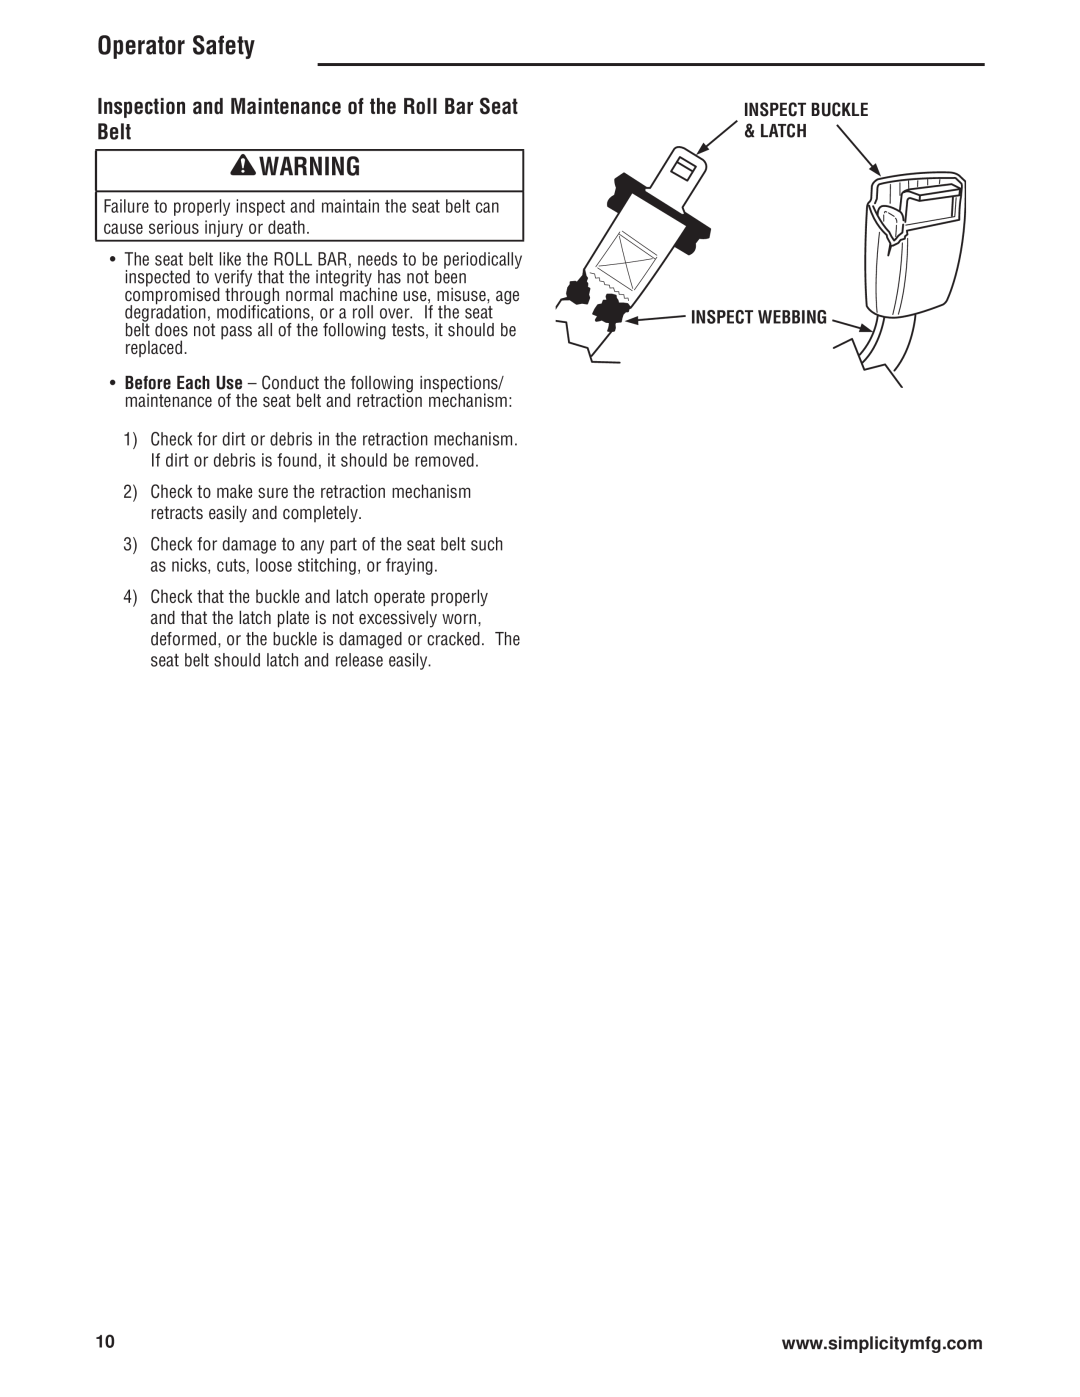 Simplicity 543777-0113-E1, 5101604 manual Inspection and Maintenance of the Roll Bar Seat Belt, Operator Safety 